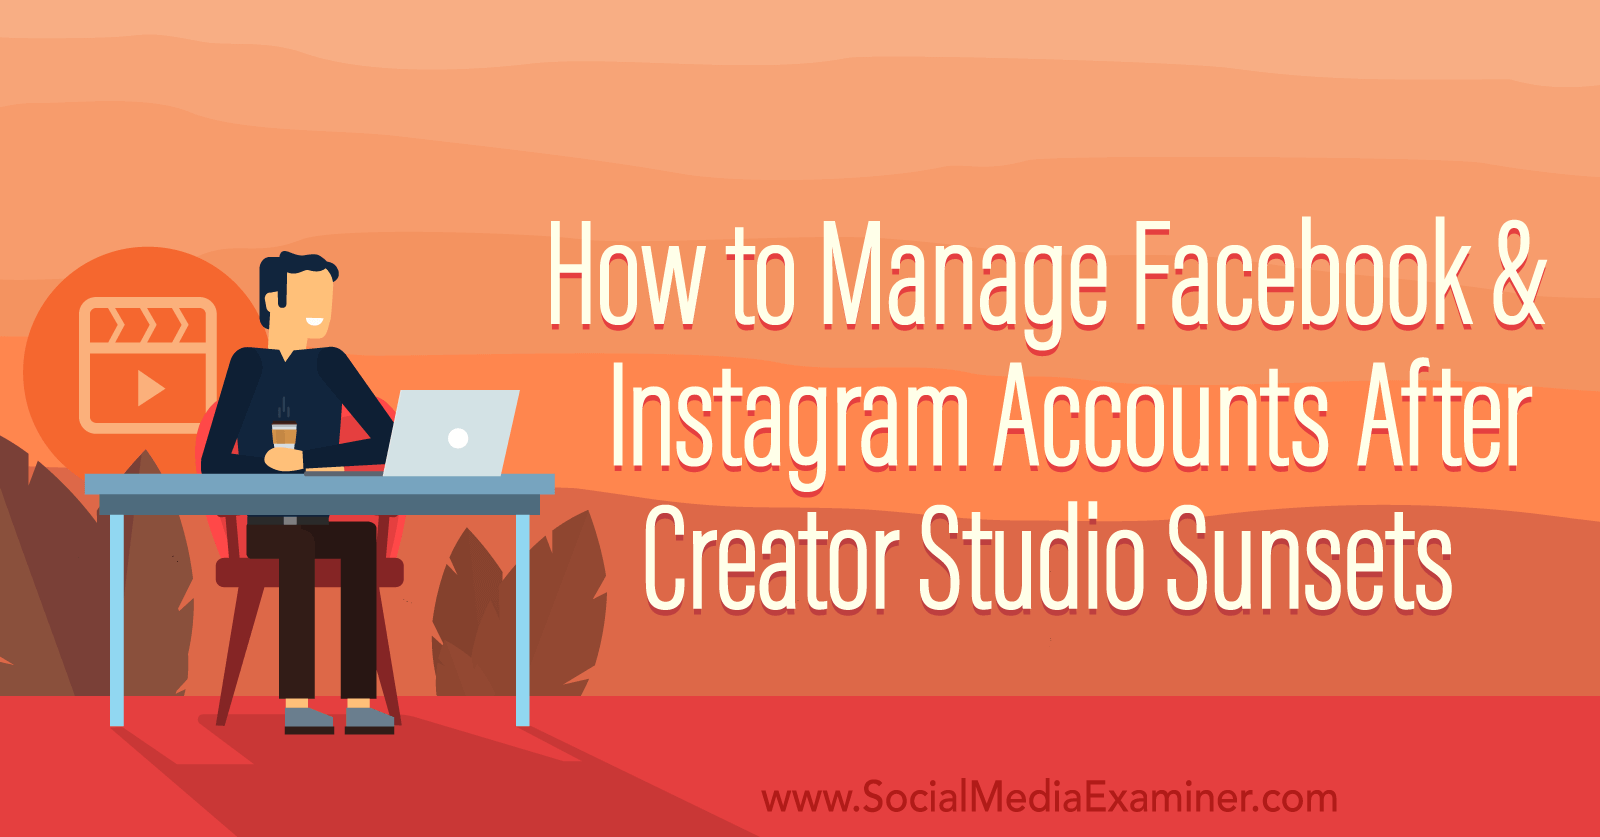 How to Manage Facebook and Instagram Accounts After Creator Studio Sunsets by Social Media Examiner